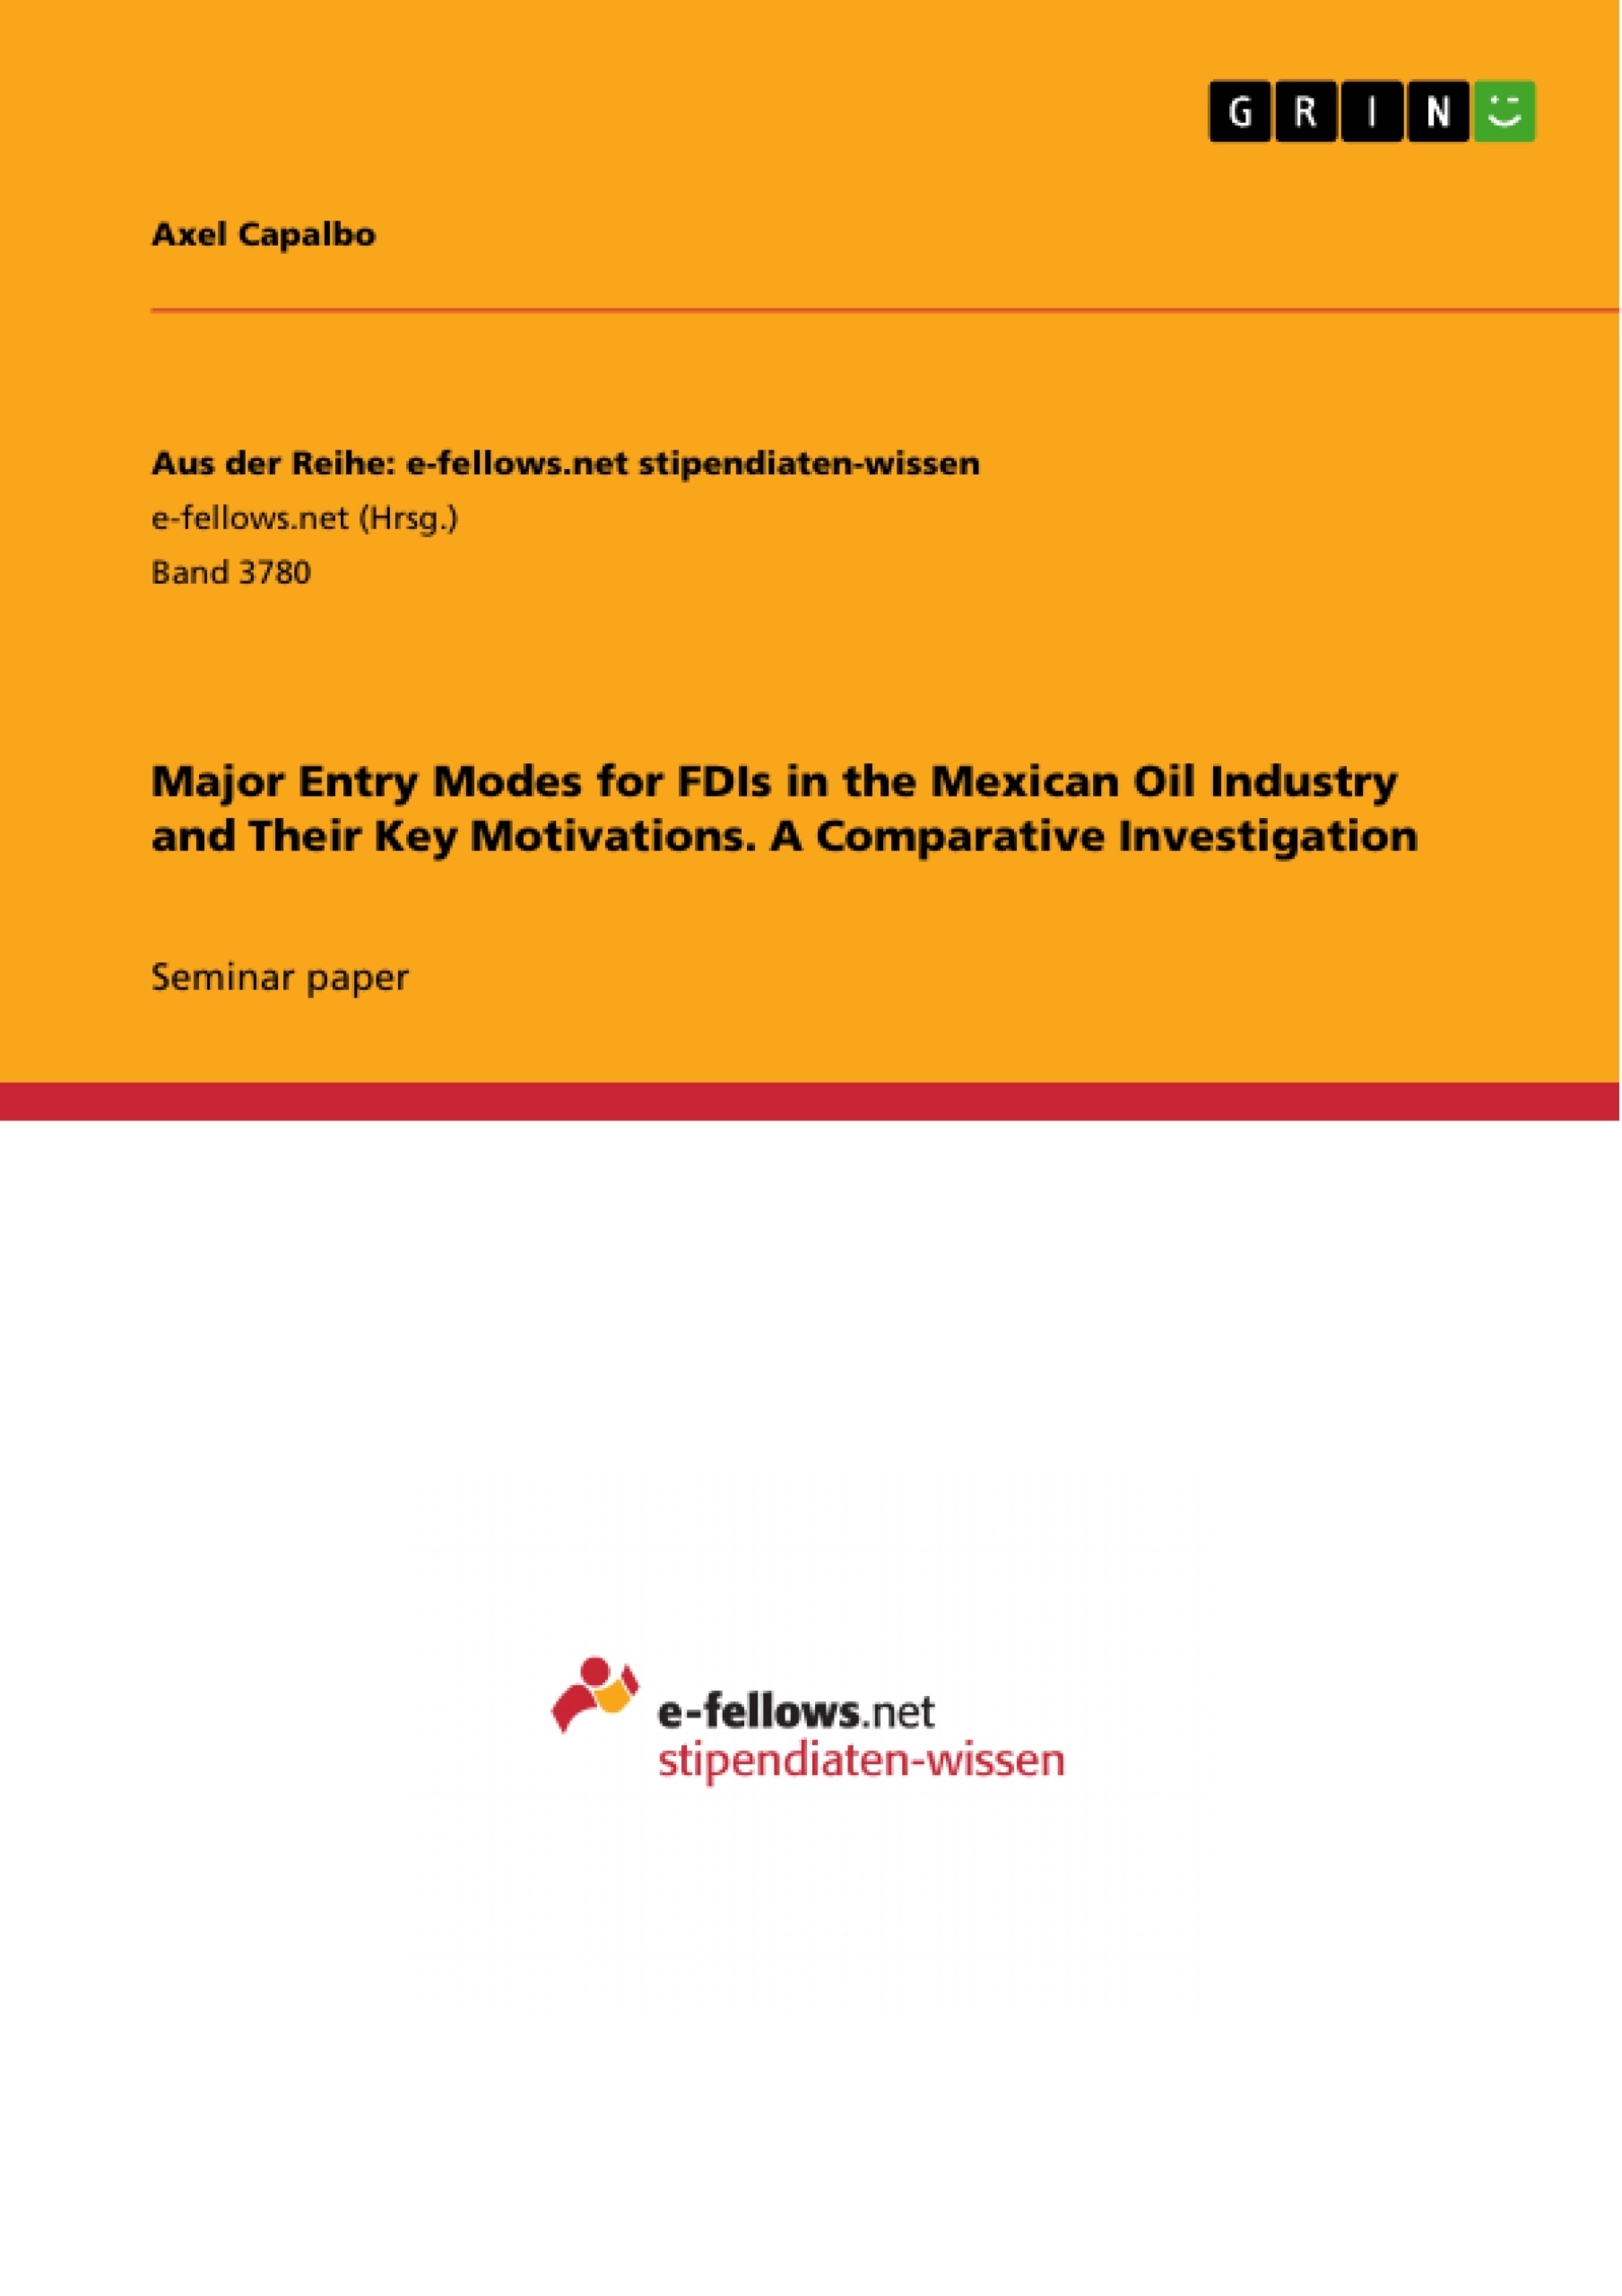 Título: Major Entry Modes for FDIs in the Mexican Oil Industry and Their Key Motivations. A Comparative Investigation